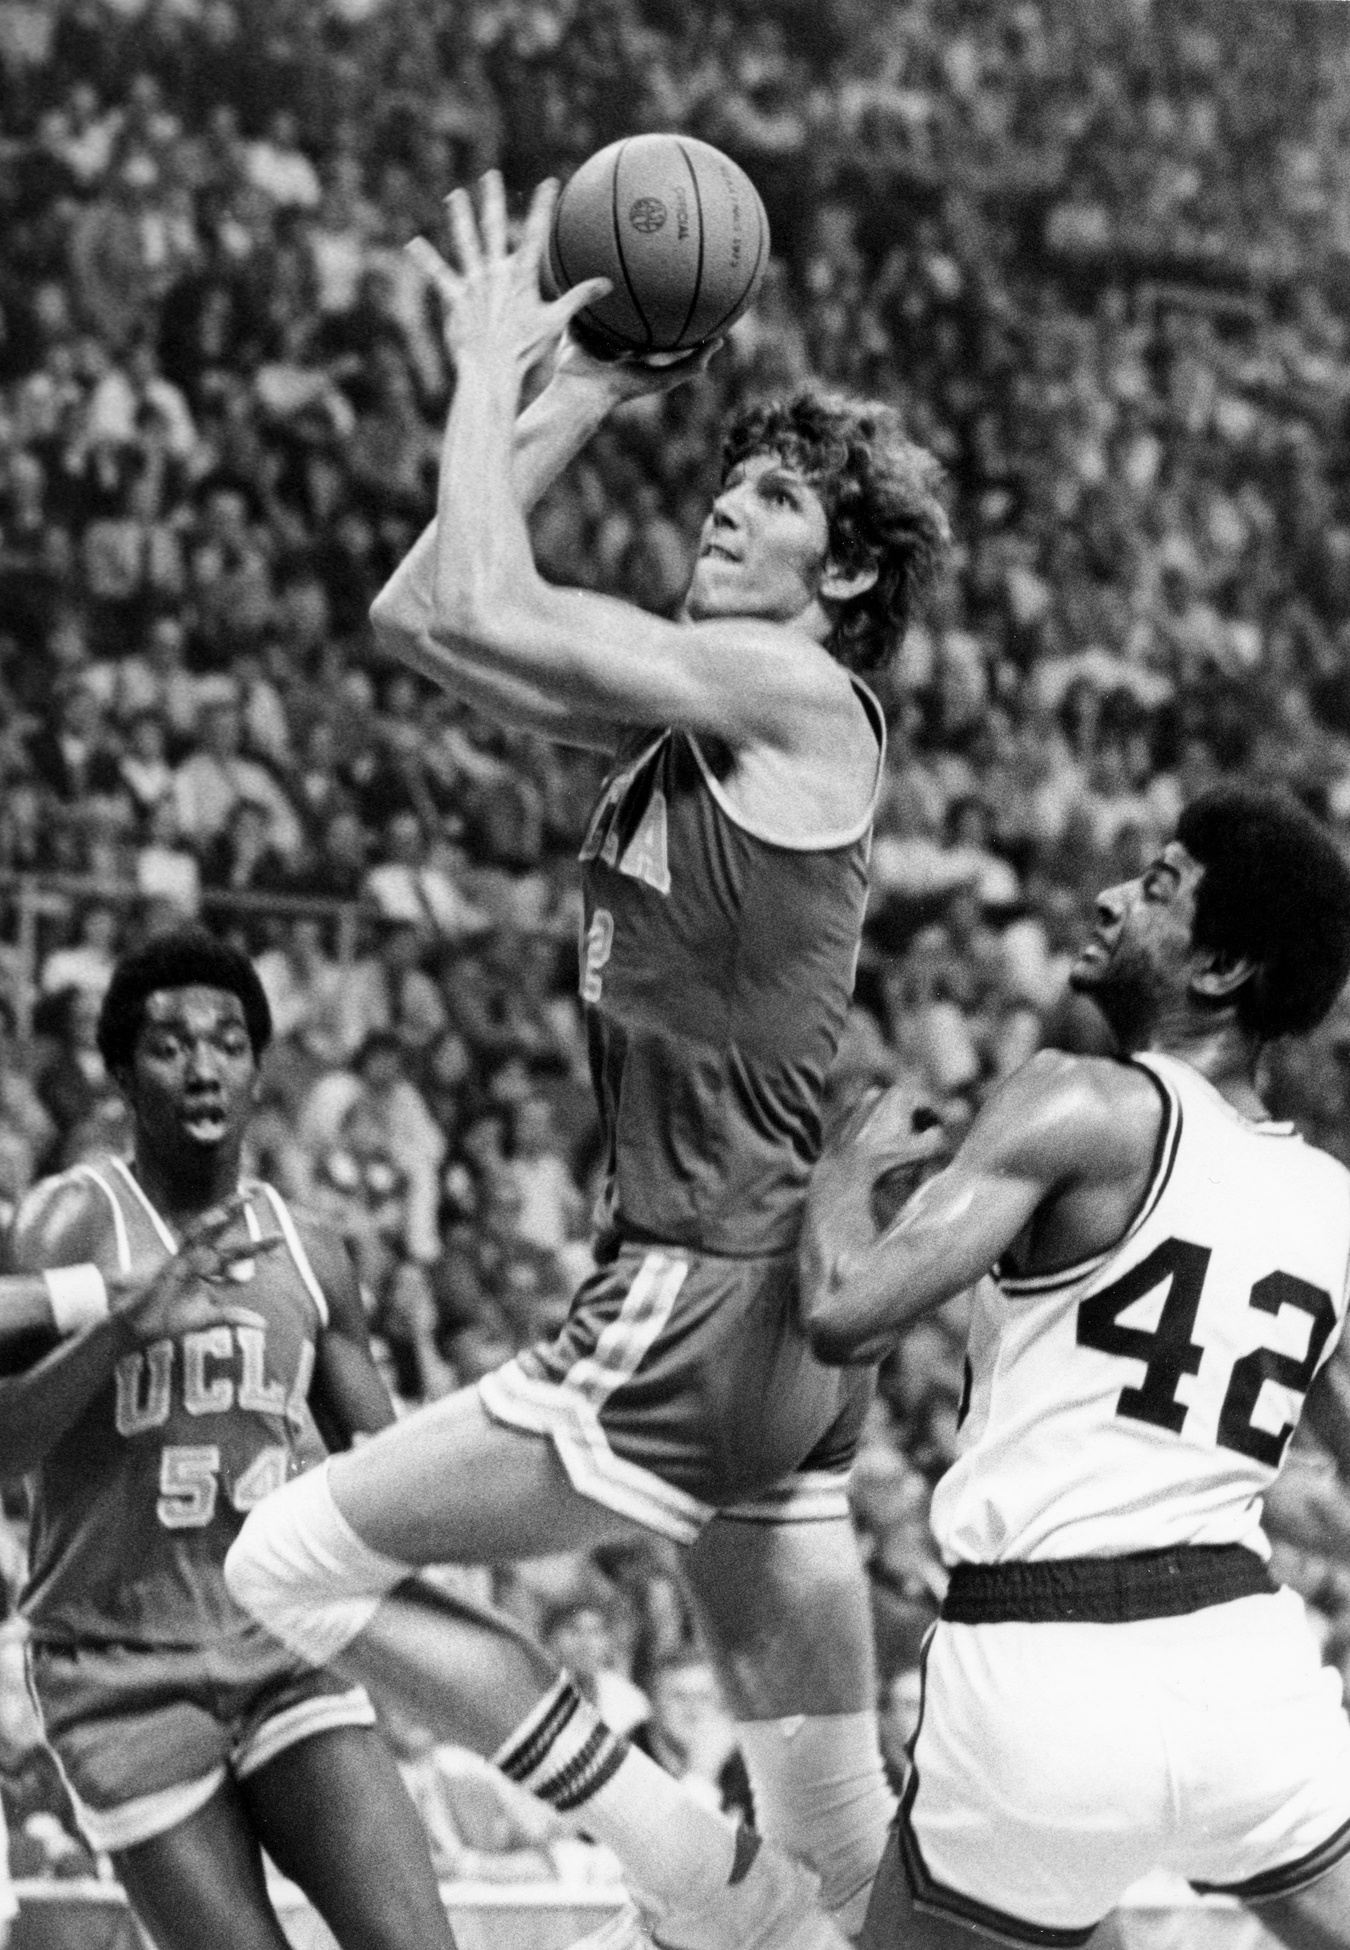 Geoff Calkins on 92.9 - Tribute to Bill Walton, his legacy, and his connections to Memphis